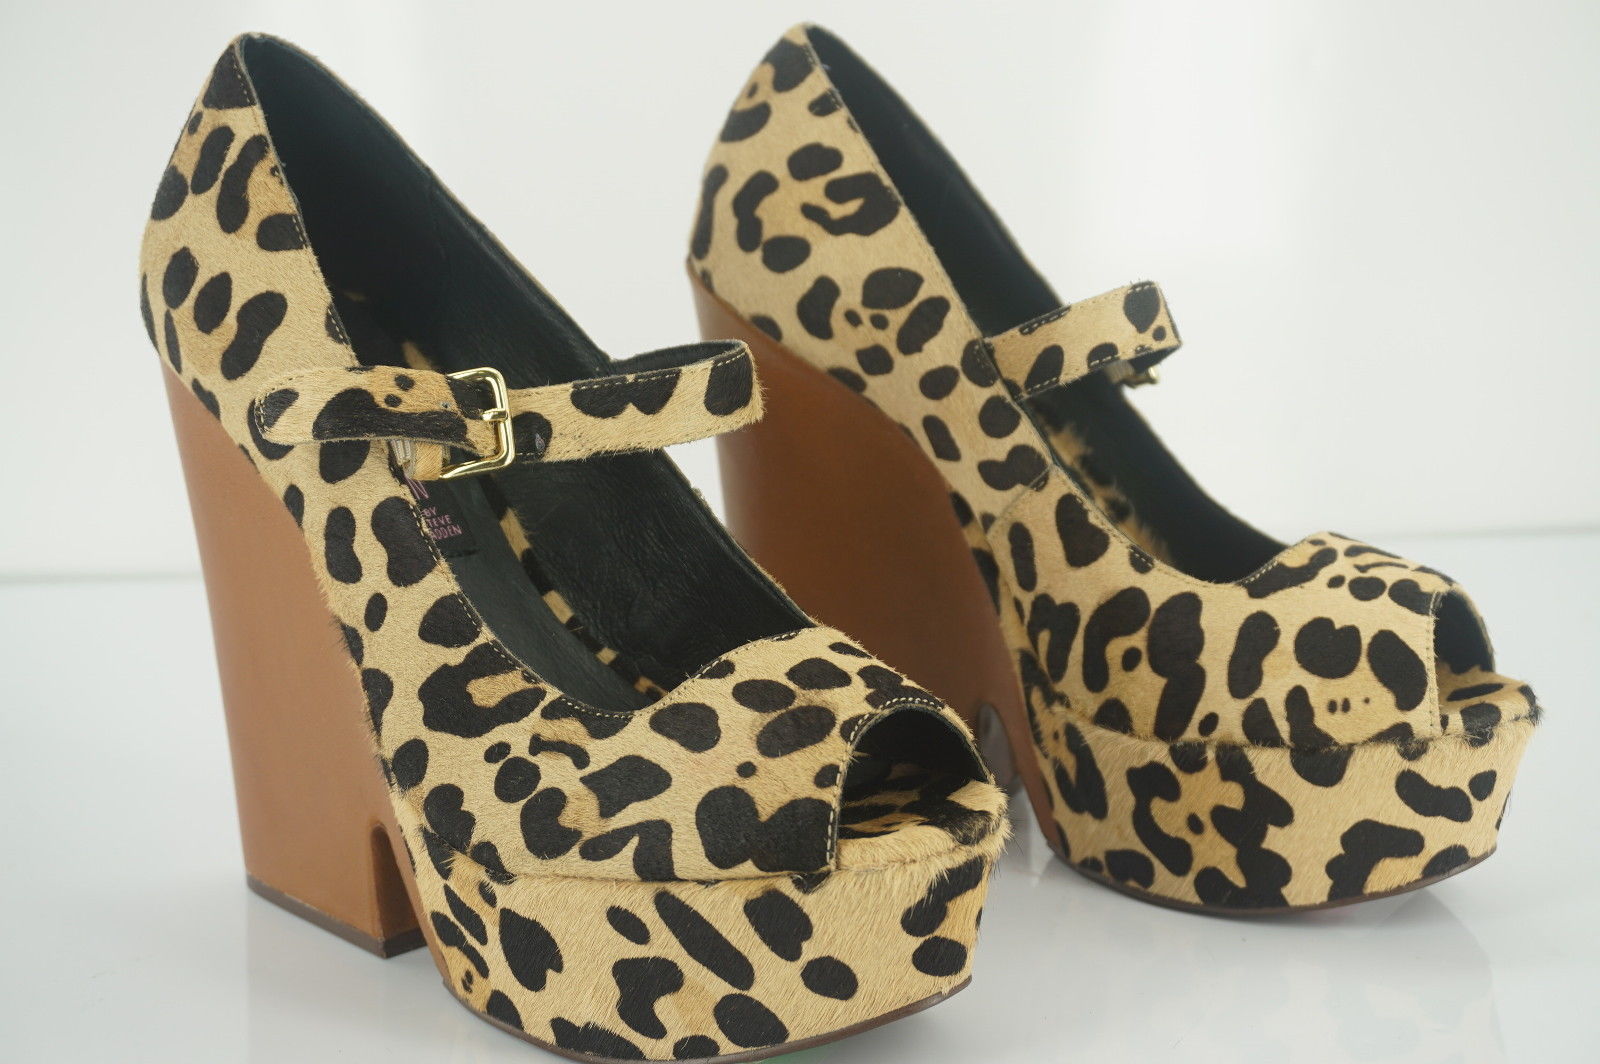 Steve Madden Leopard Hair Knockout Mary Jane Pump Size 8 New Wedge Open Toe$200